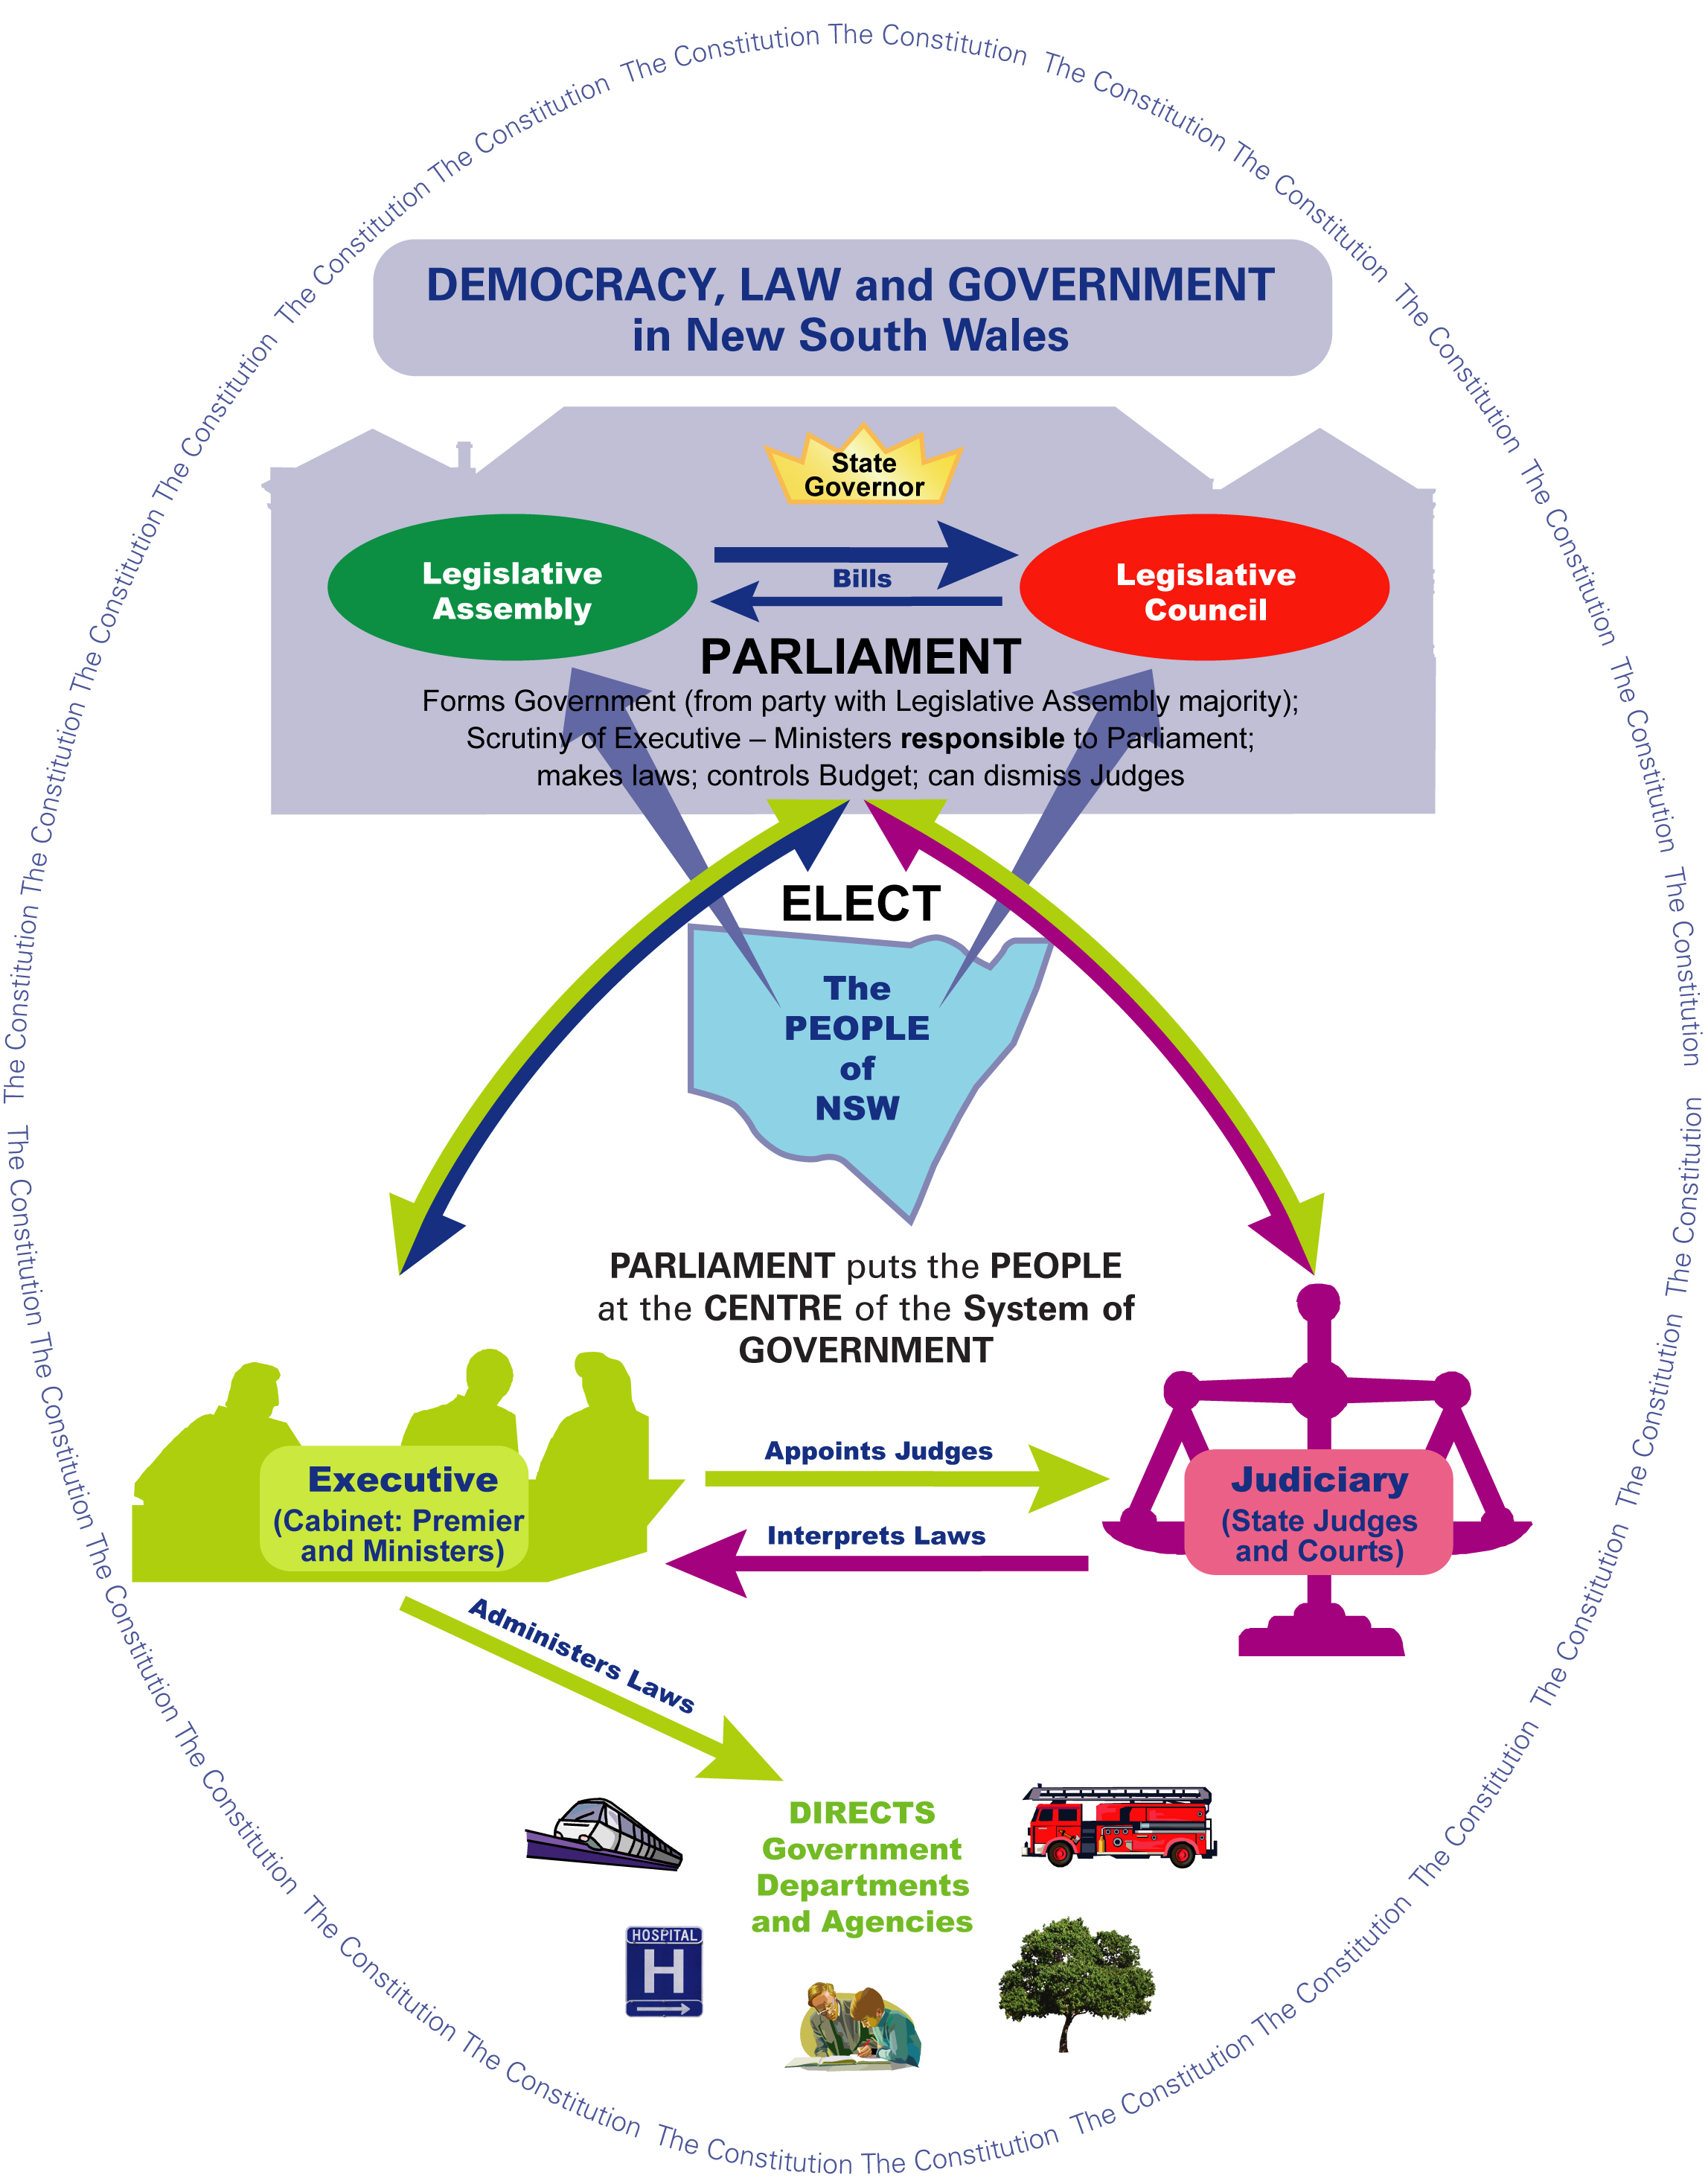 A diagramatic representation of the NSW Constitution.